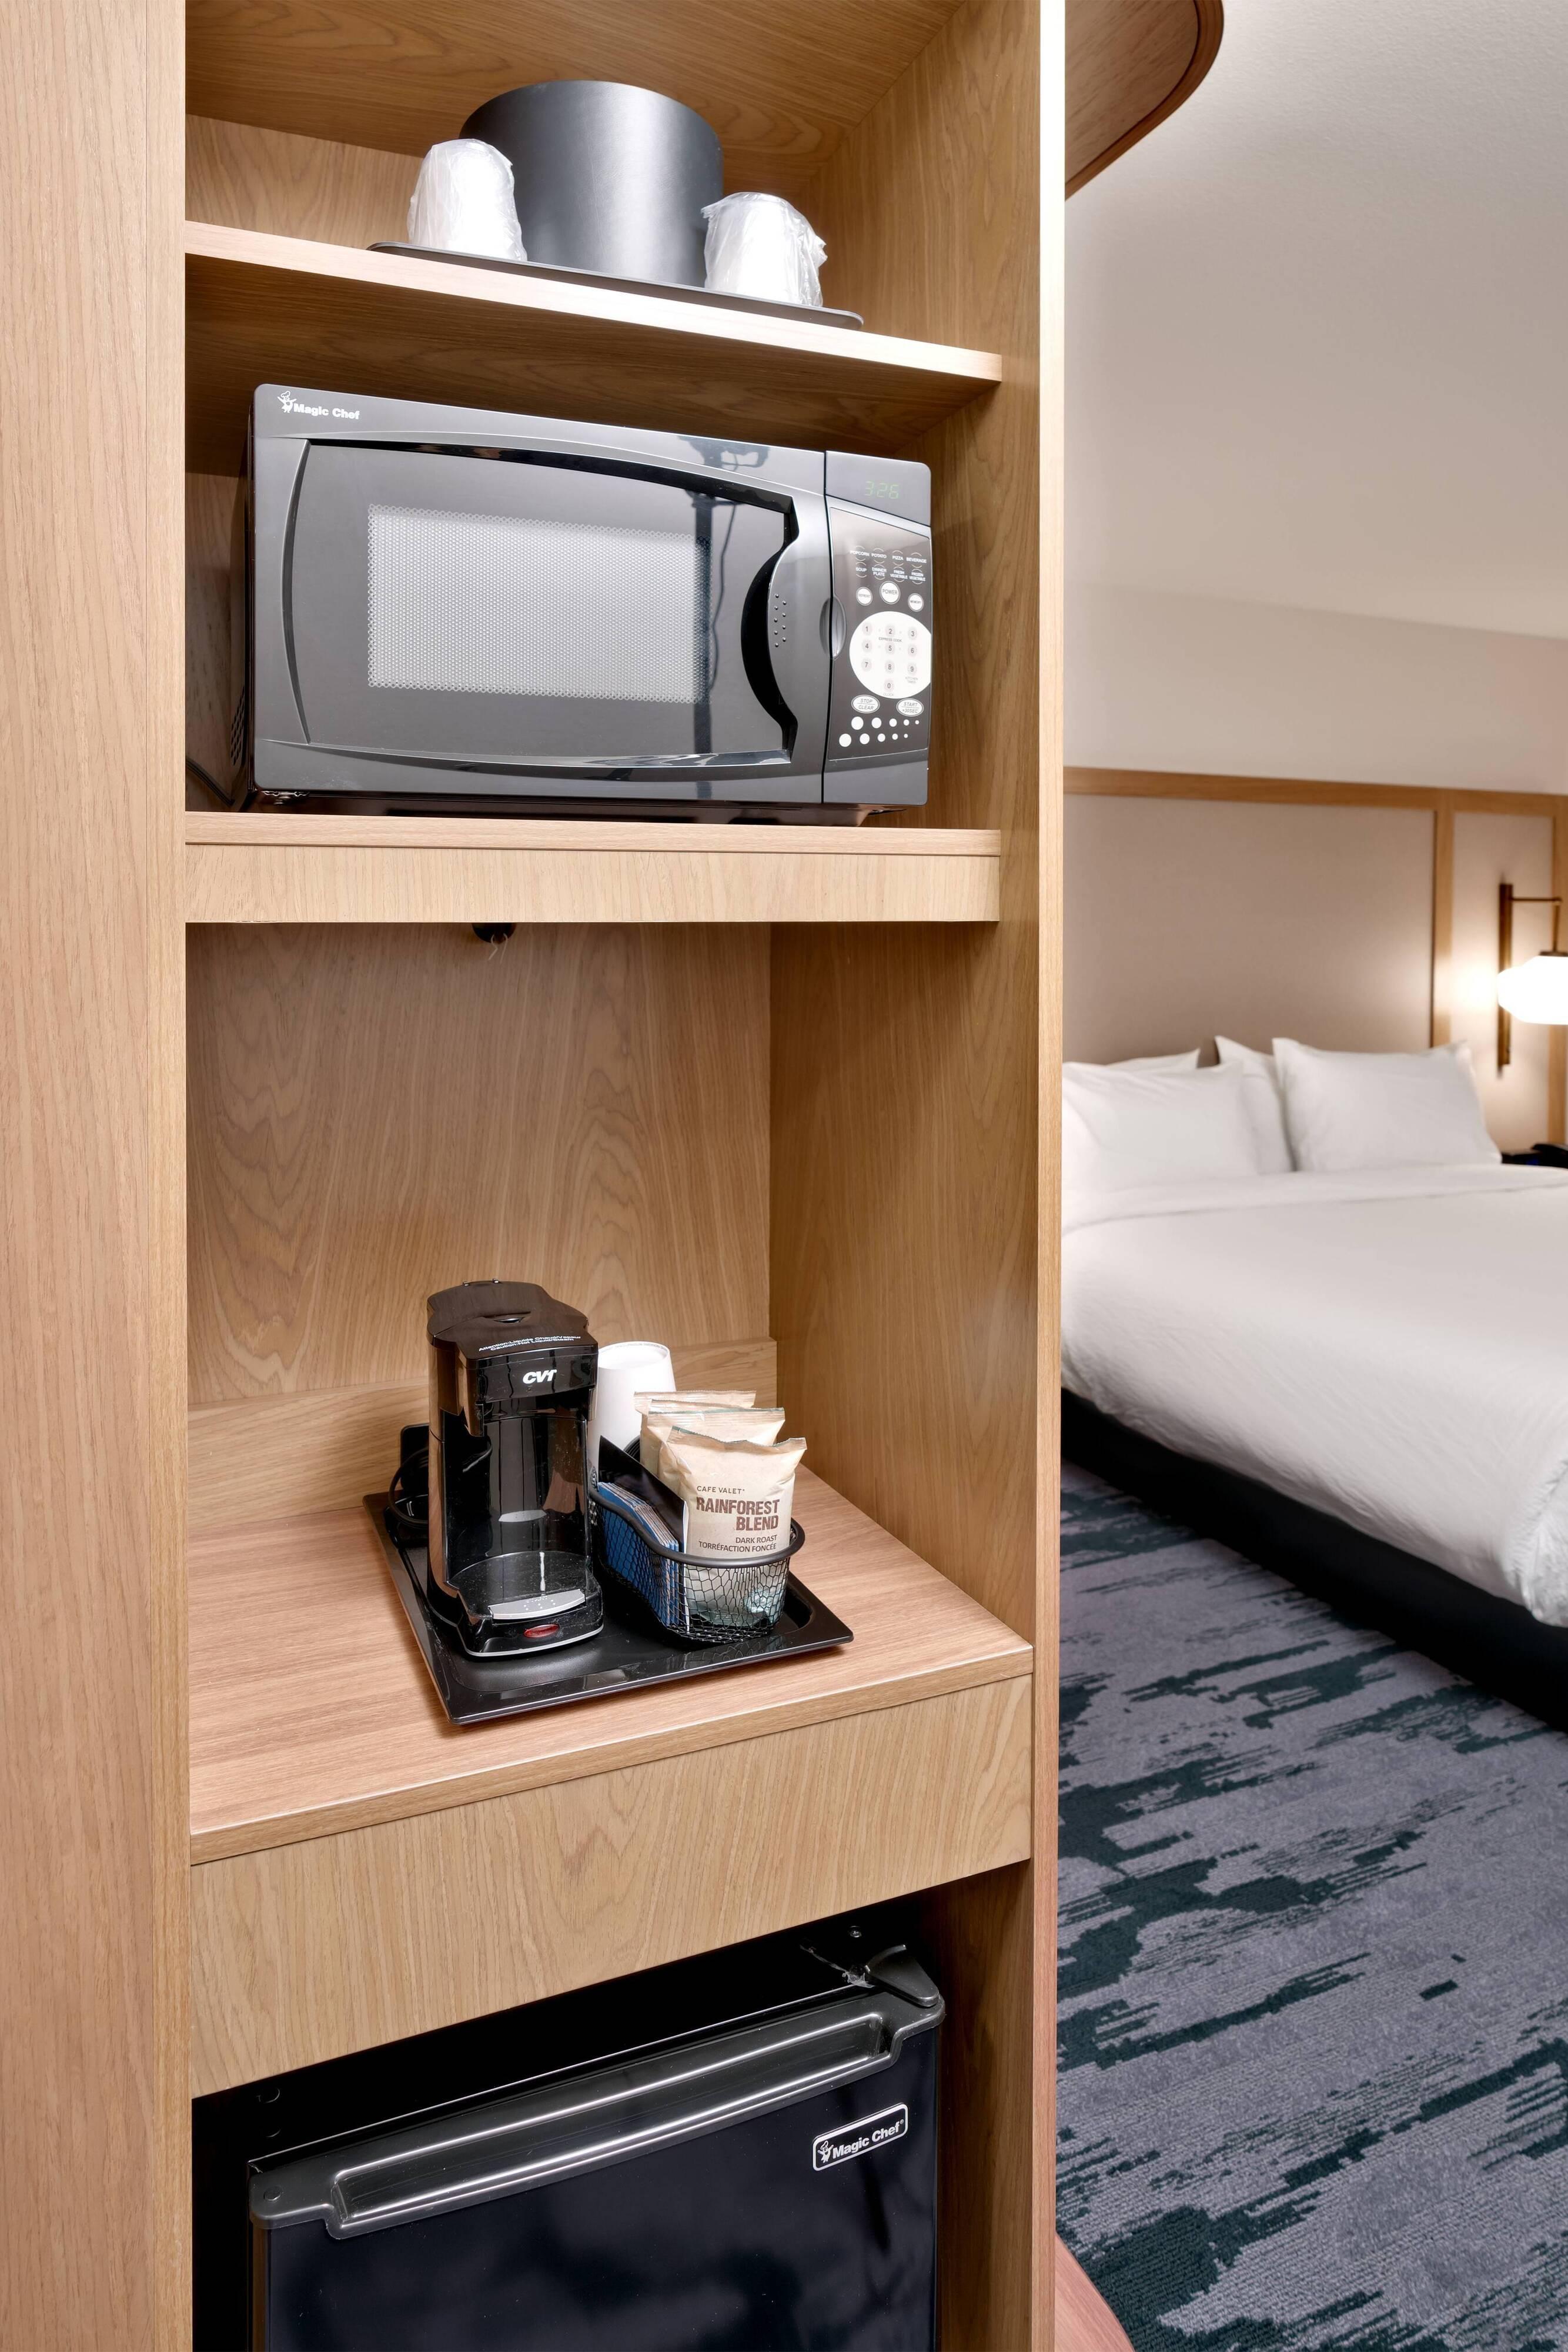 Enjoy the suite-style with a microwave and refrigerator in every room.